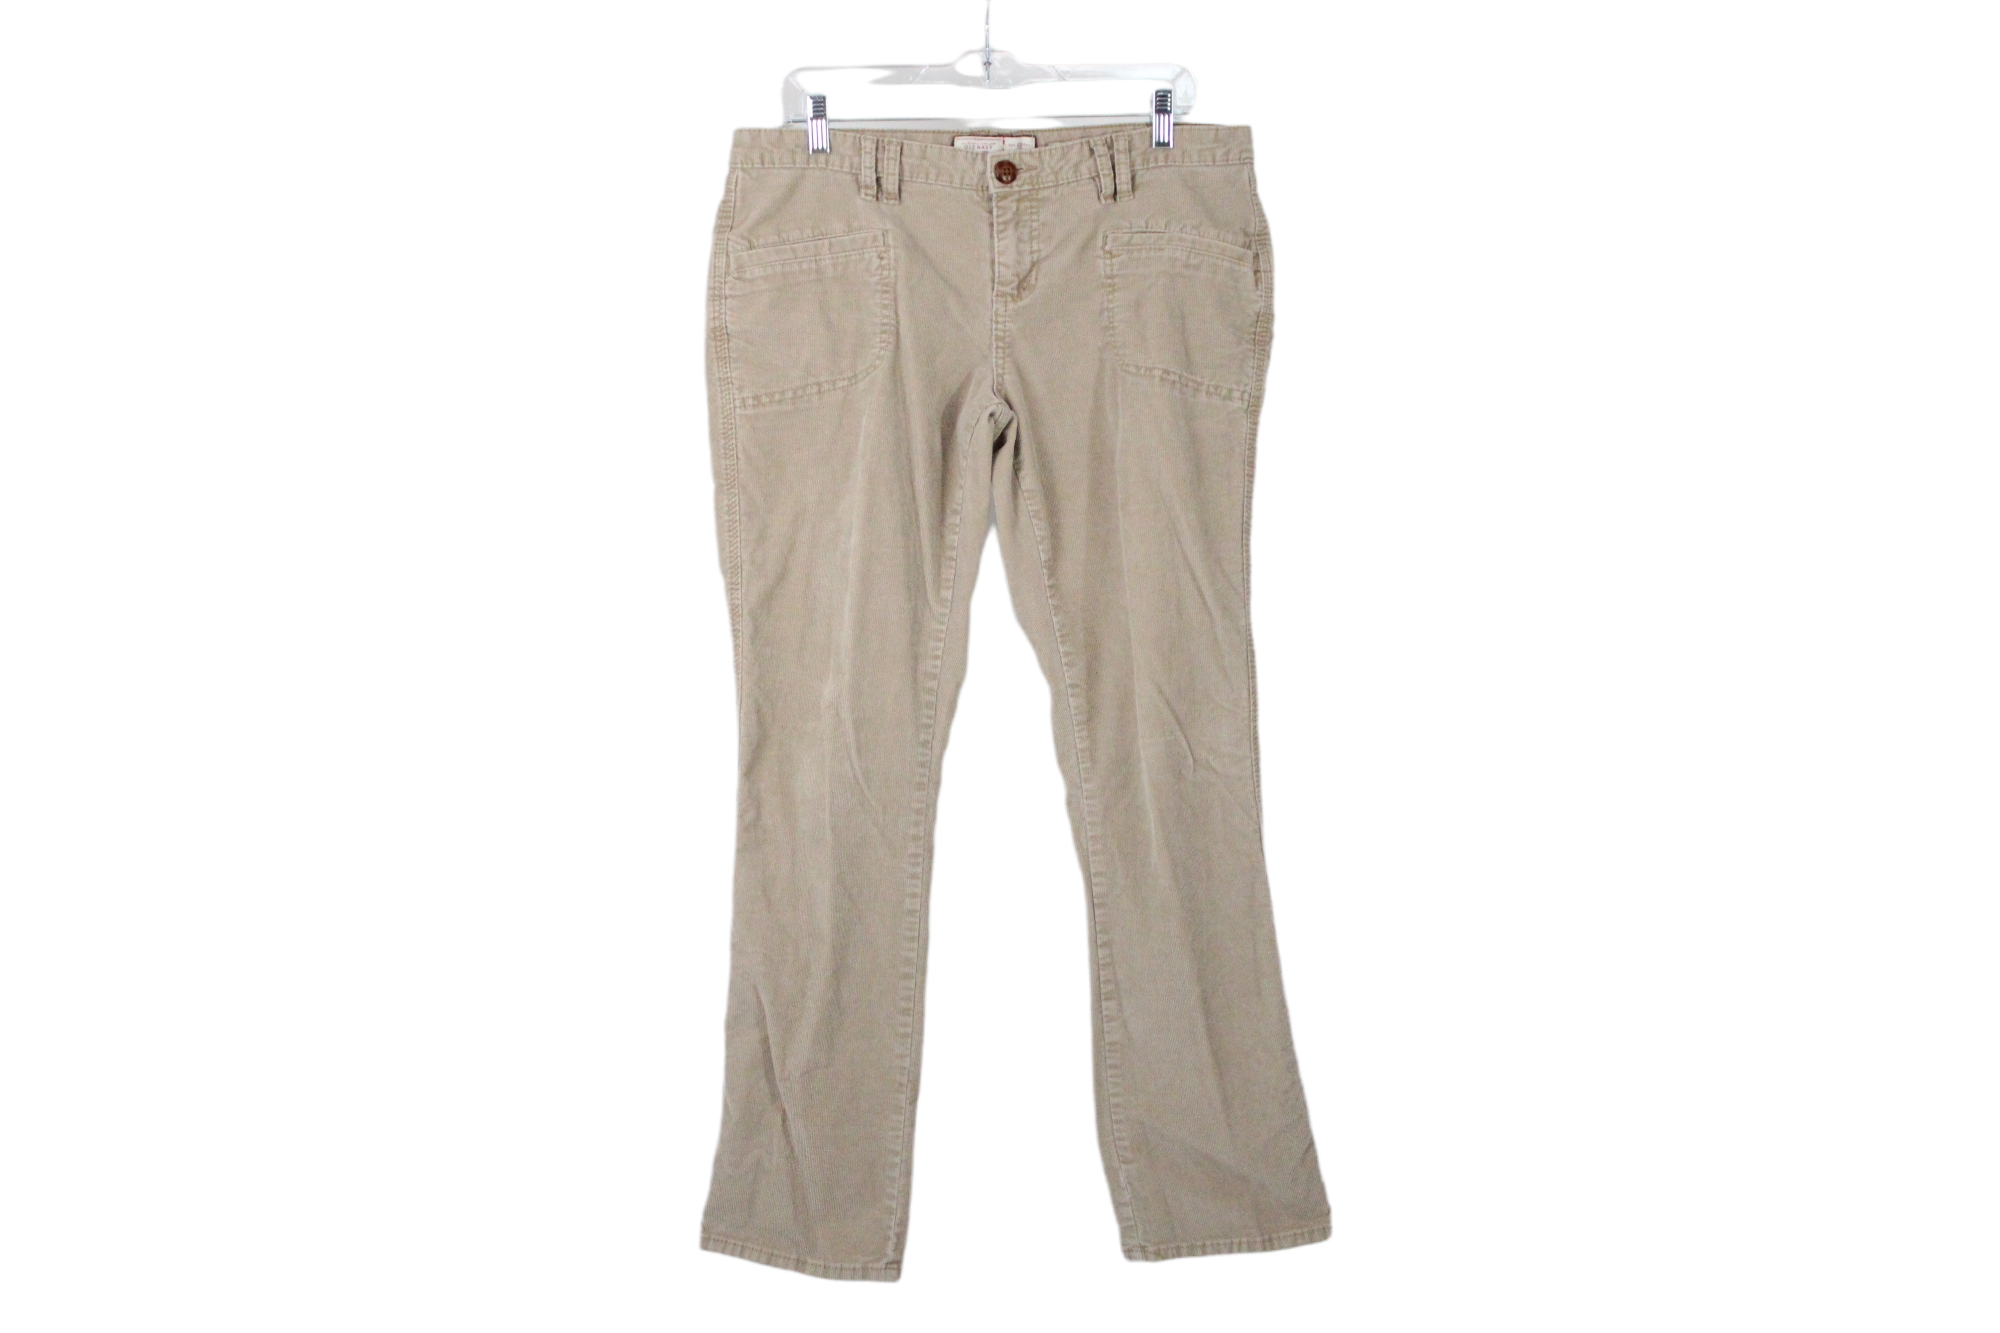 Old Navy Stretch Lowest Rise Tan Corduroy Pant | 12